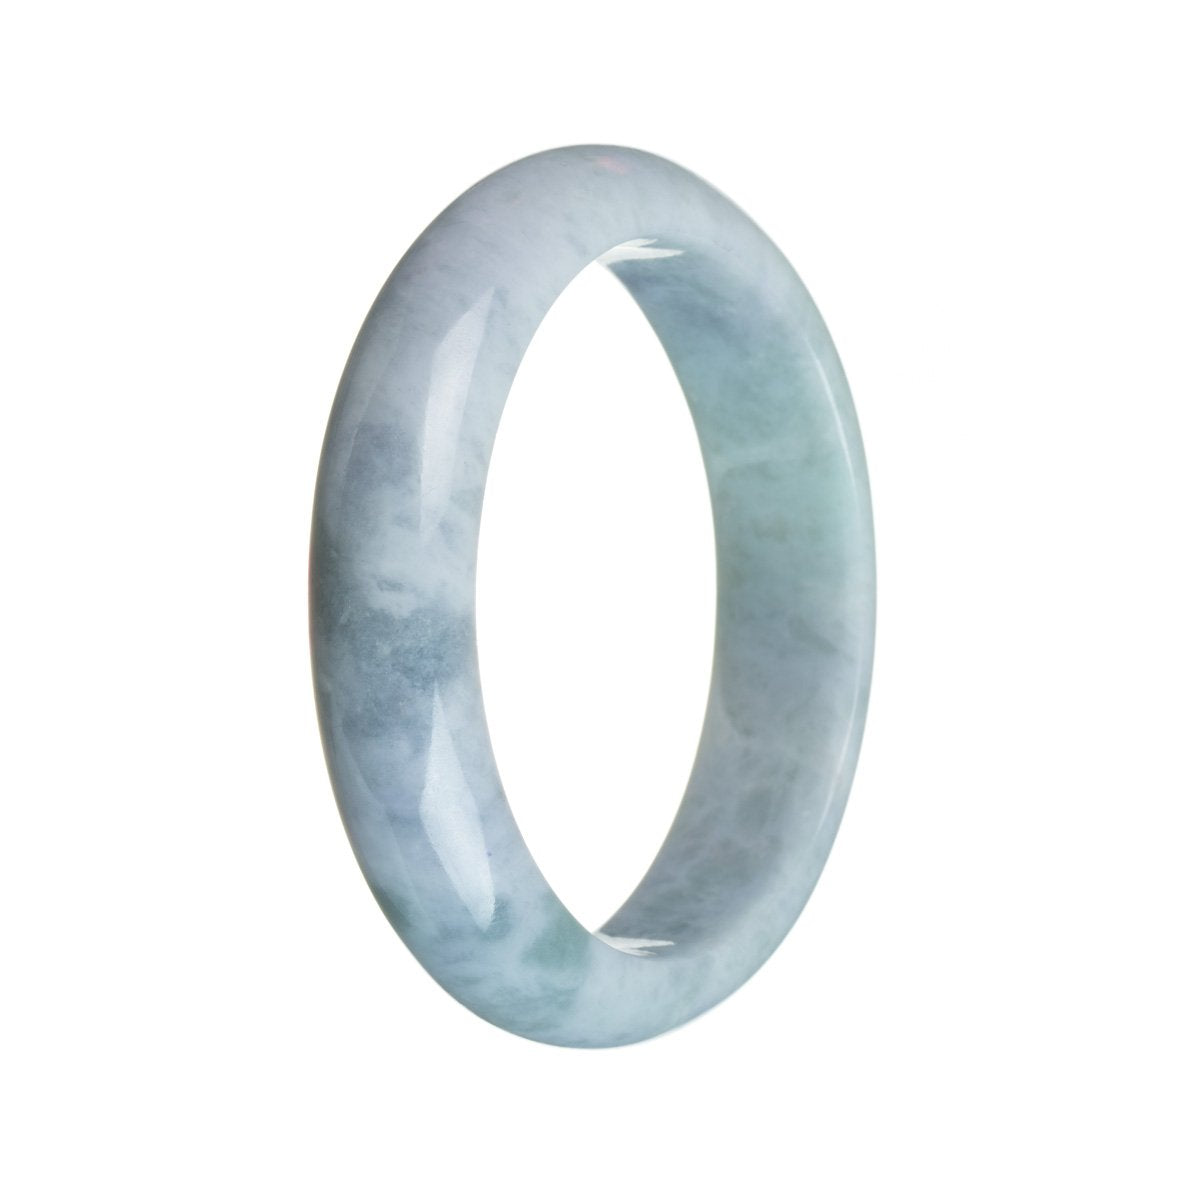 A beautiful bangle bracelet made of authentic Grade A Bluish Lavender Burma Jade. The bracelet has a half-moon shape and measures 59mm in diameter. It is a stunning piece of jewelry from the brand MAYS.